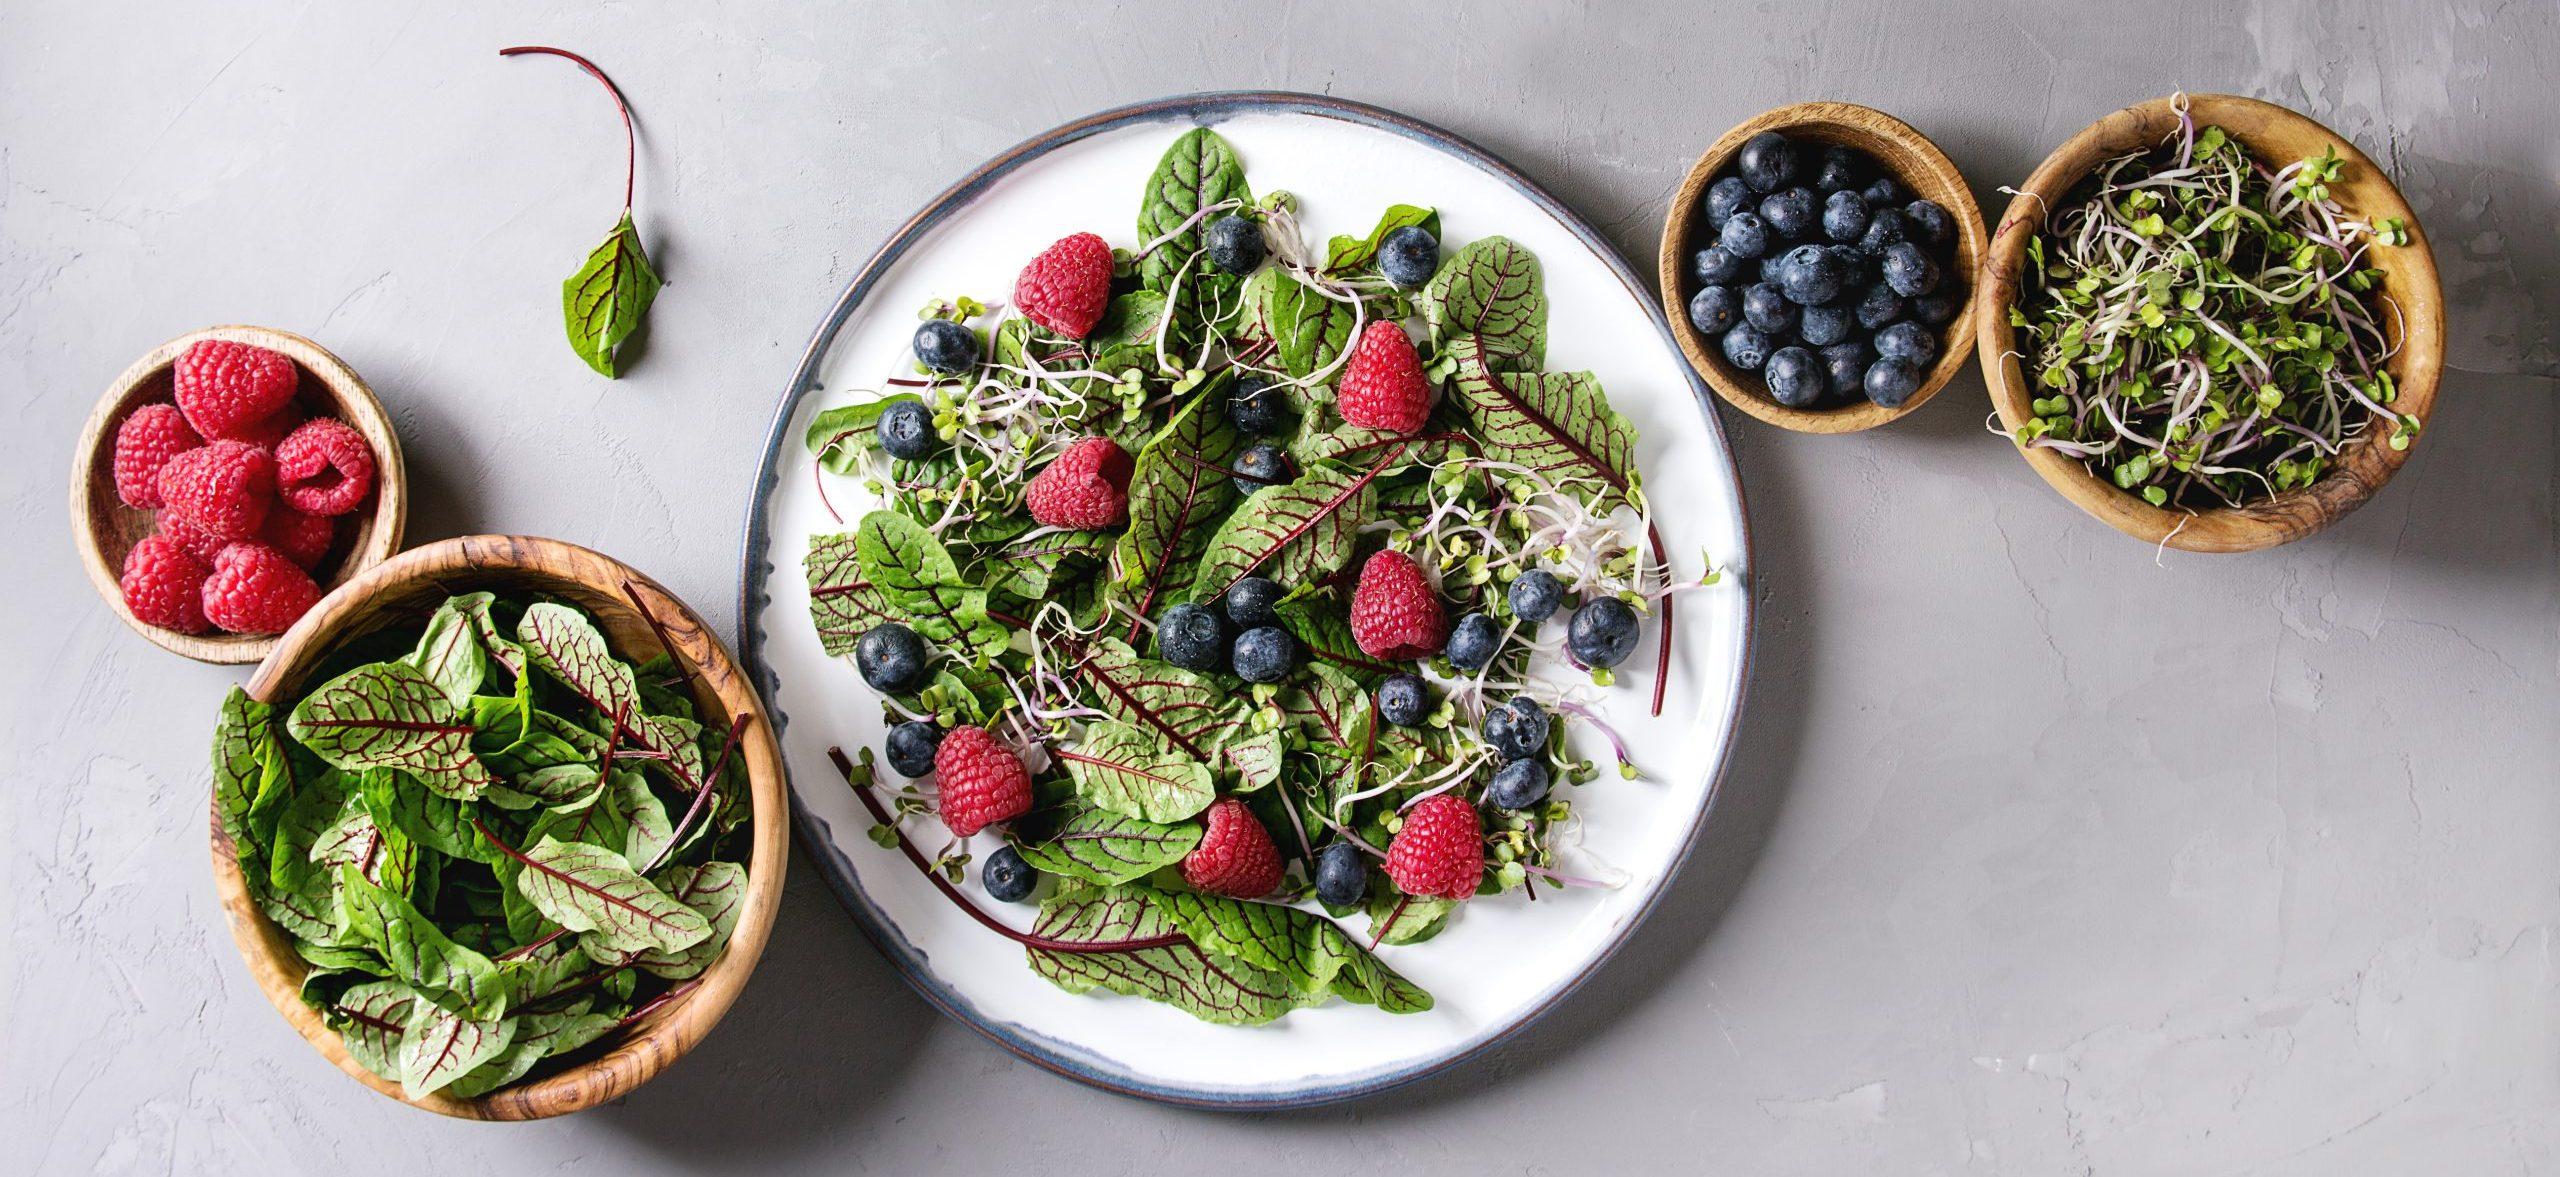 Green salad with berries